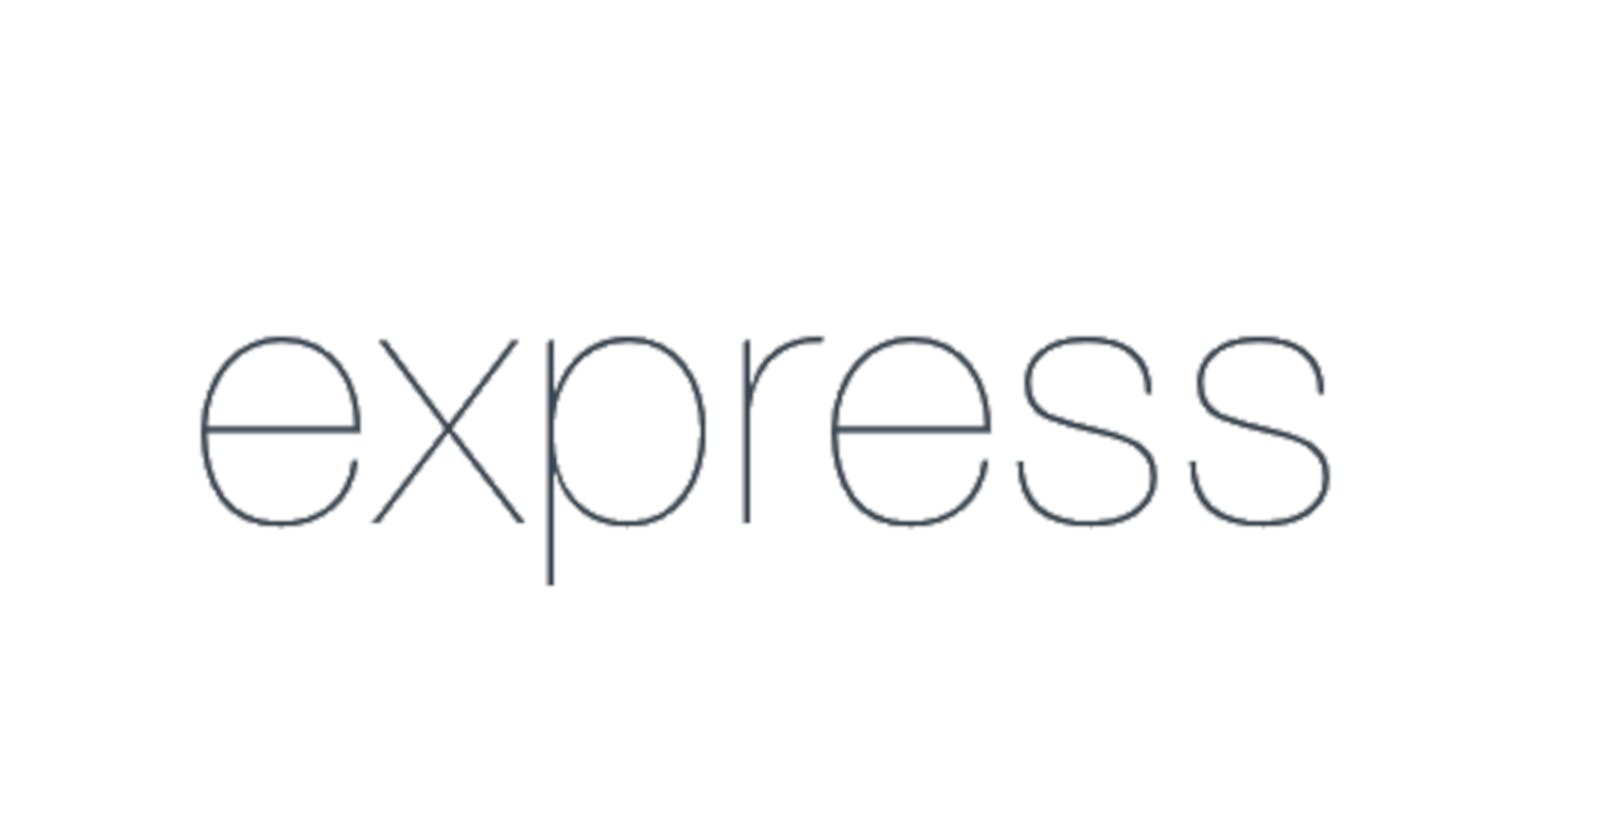 How To Download a File Using Express